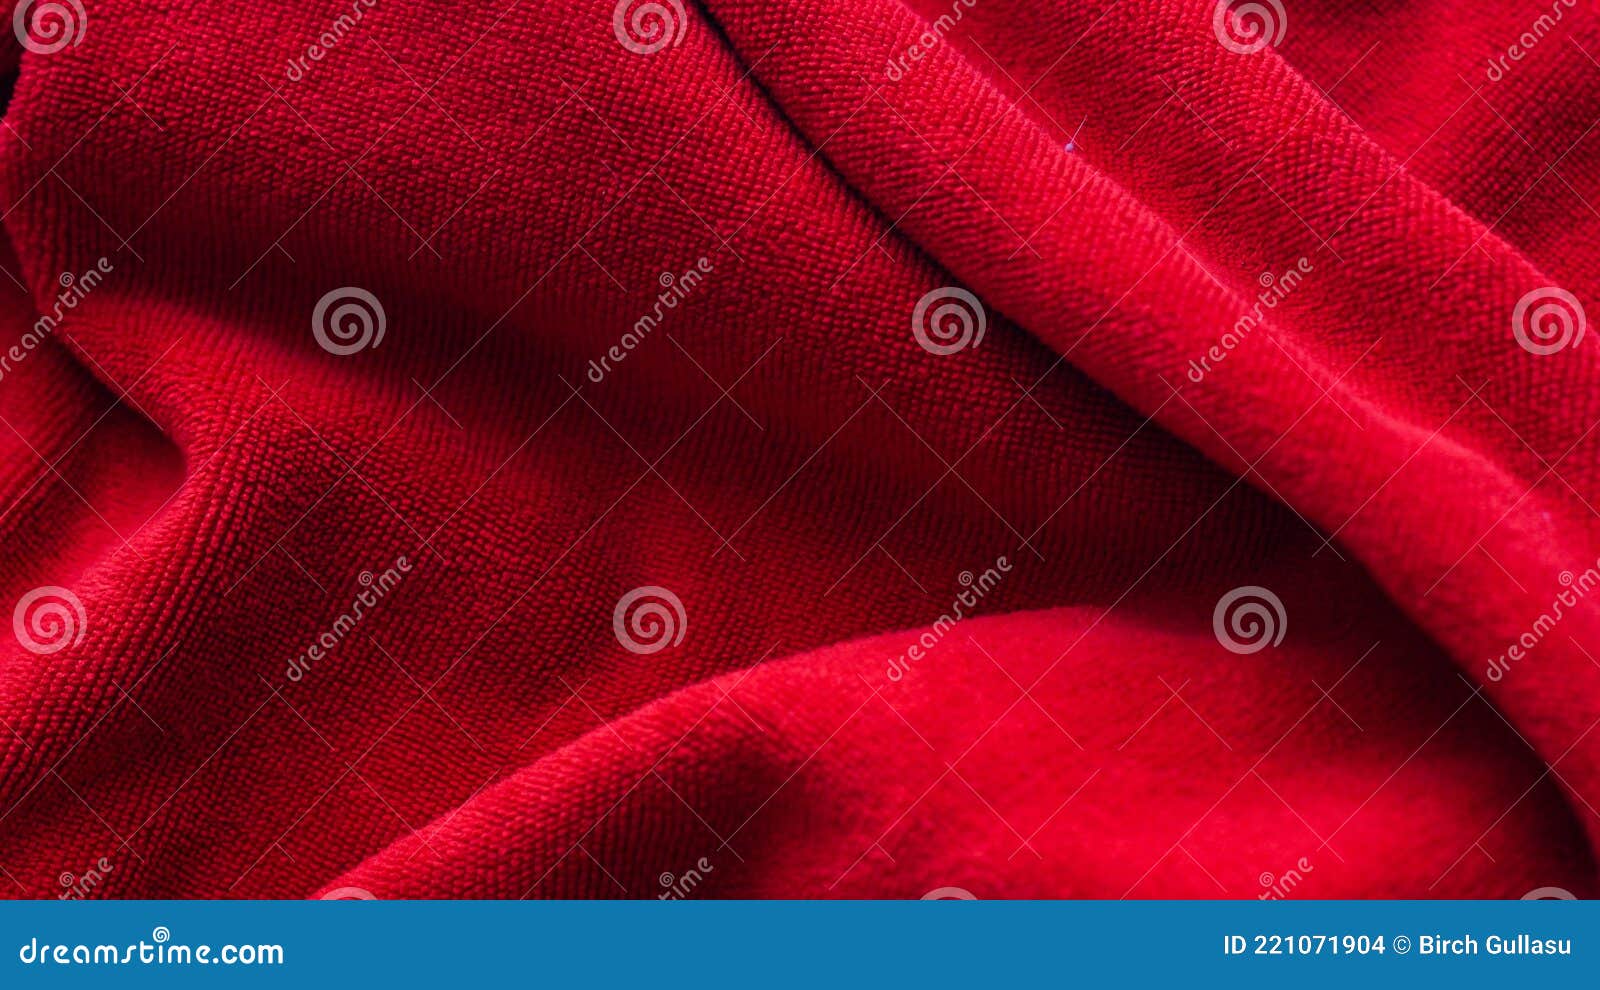 Red Fabric Texture BackgroundRed Fabric Texture Background on the Floor ...